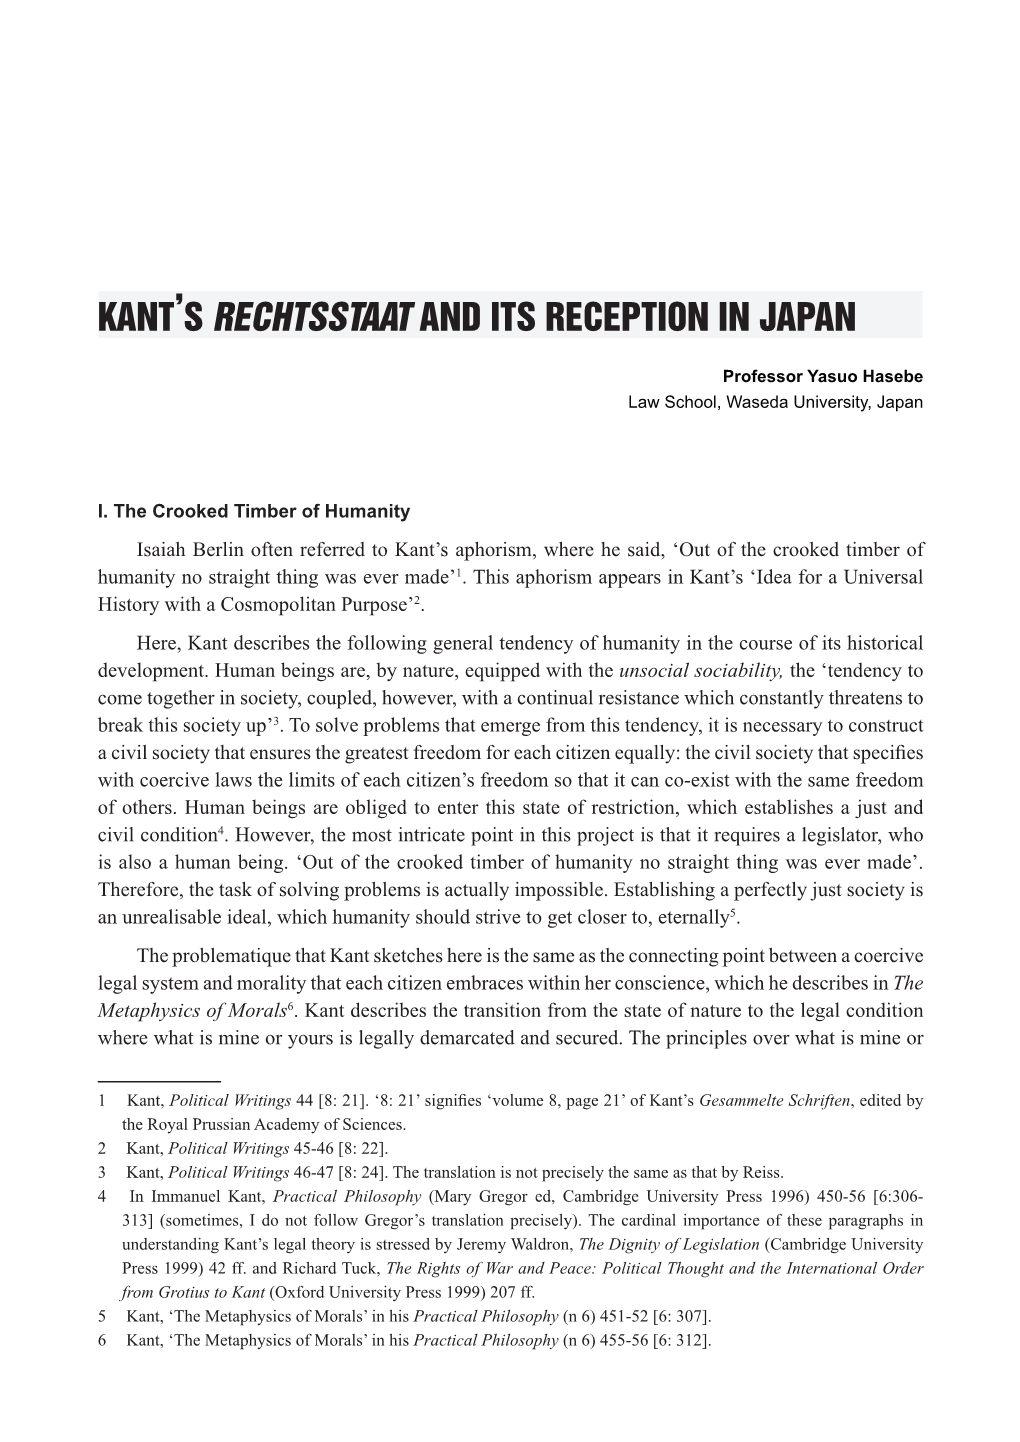 Kant's Rechtsstaat and Its Reception in Japan